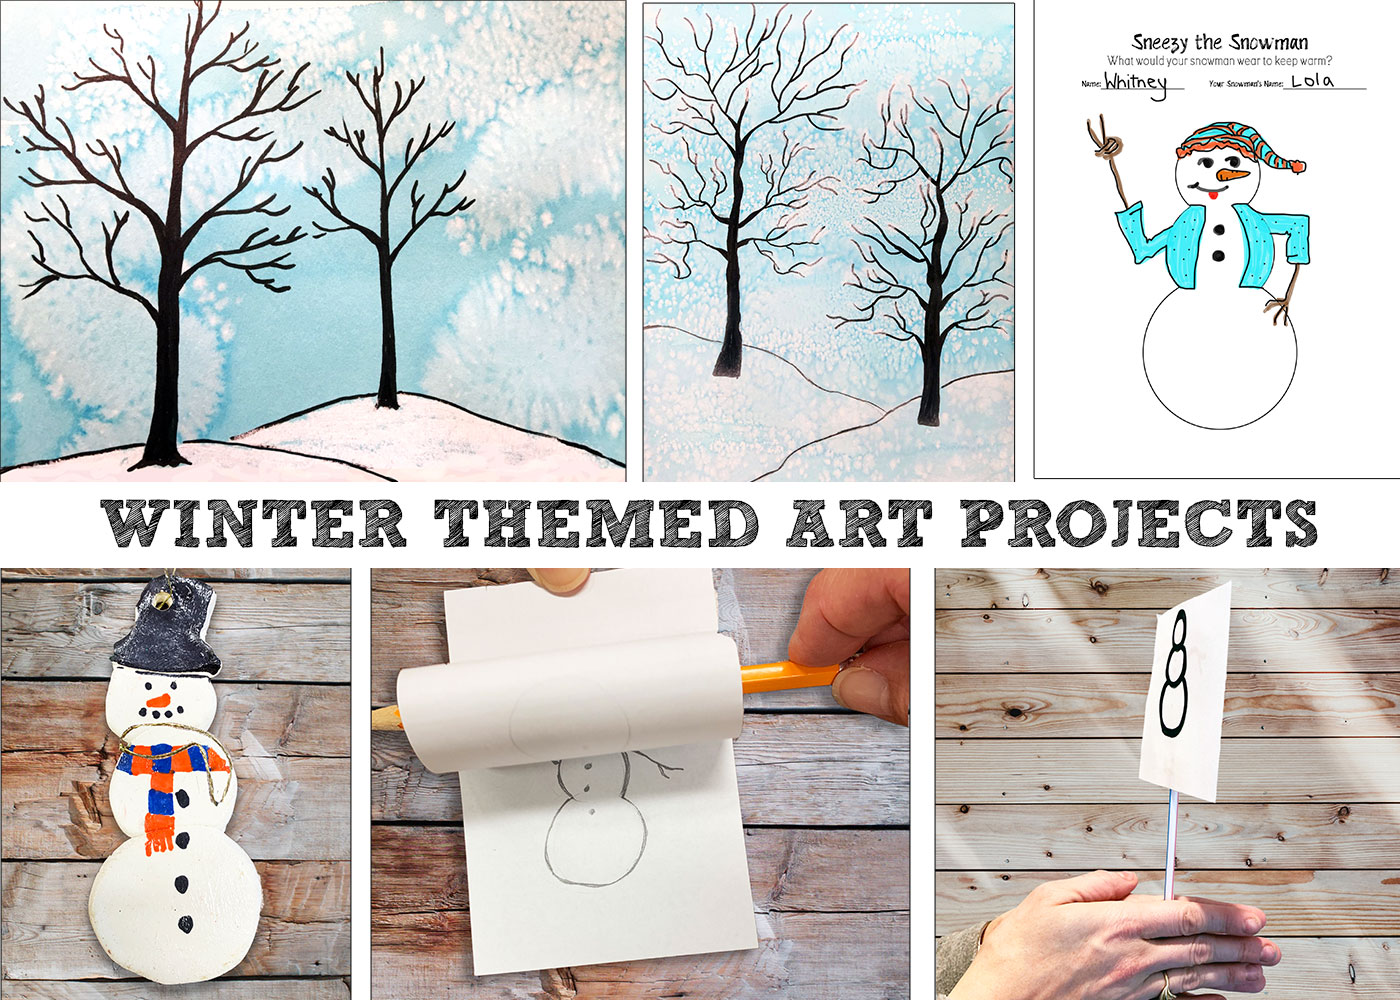 winter art project ideas image examples